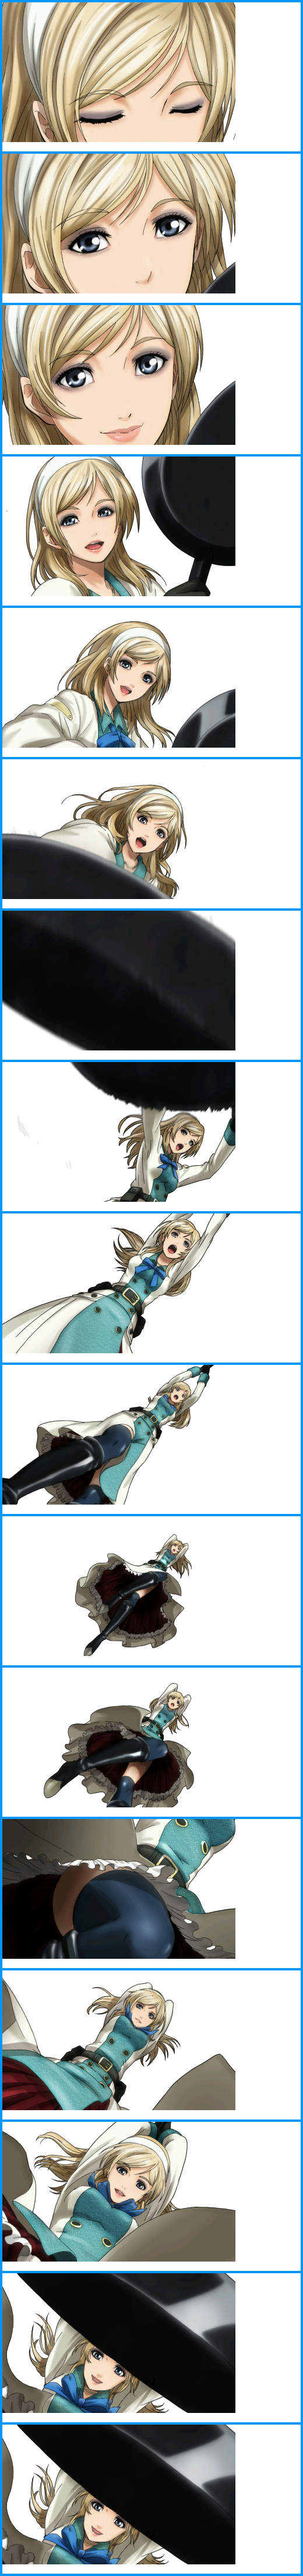 Project X Zone 2 - Leanne